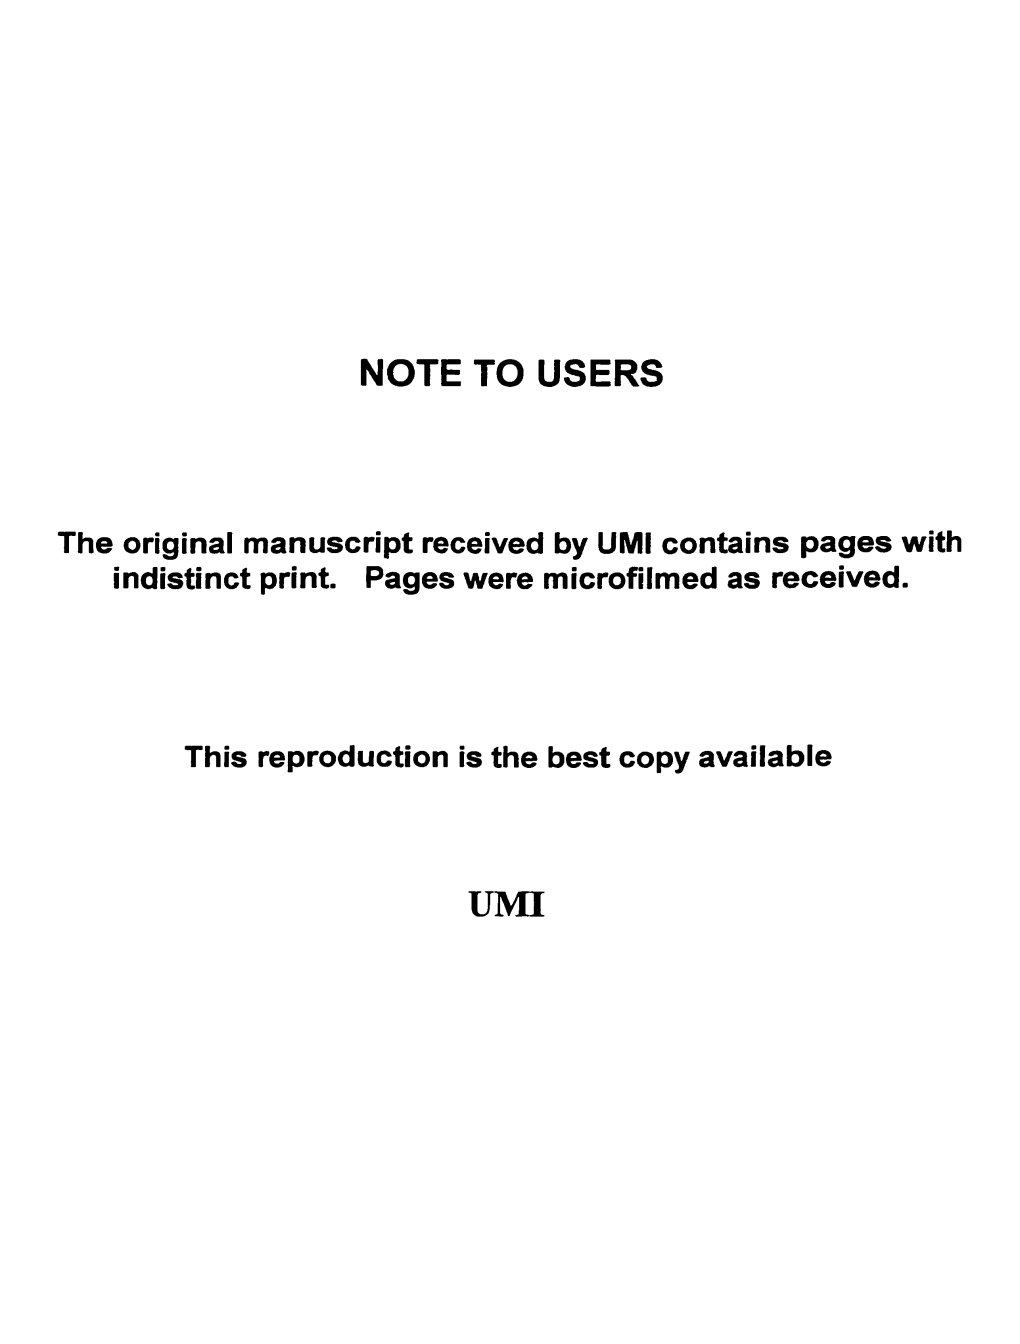 The Original Manuscript Received by UMI Contains Pages with Indistinct Print. Pages Were Microfilmed As Received. This Reproduction Is the Best Copy Available